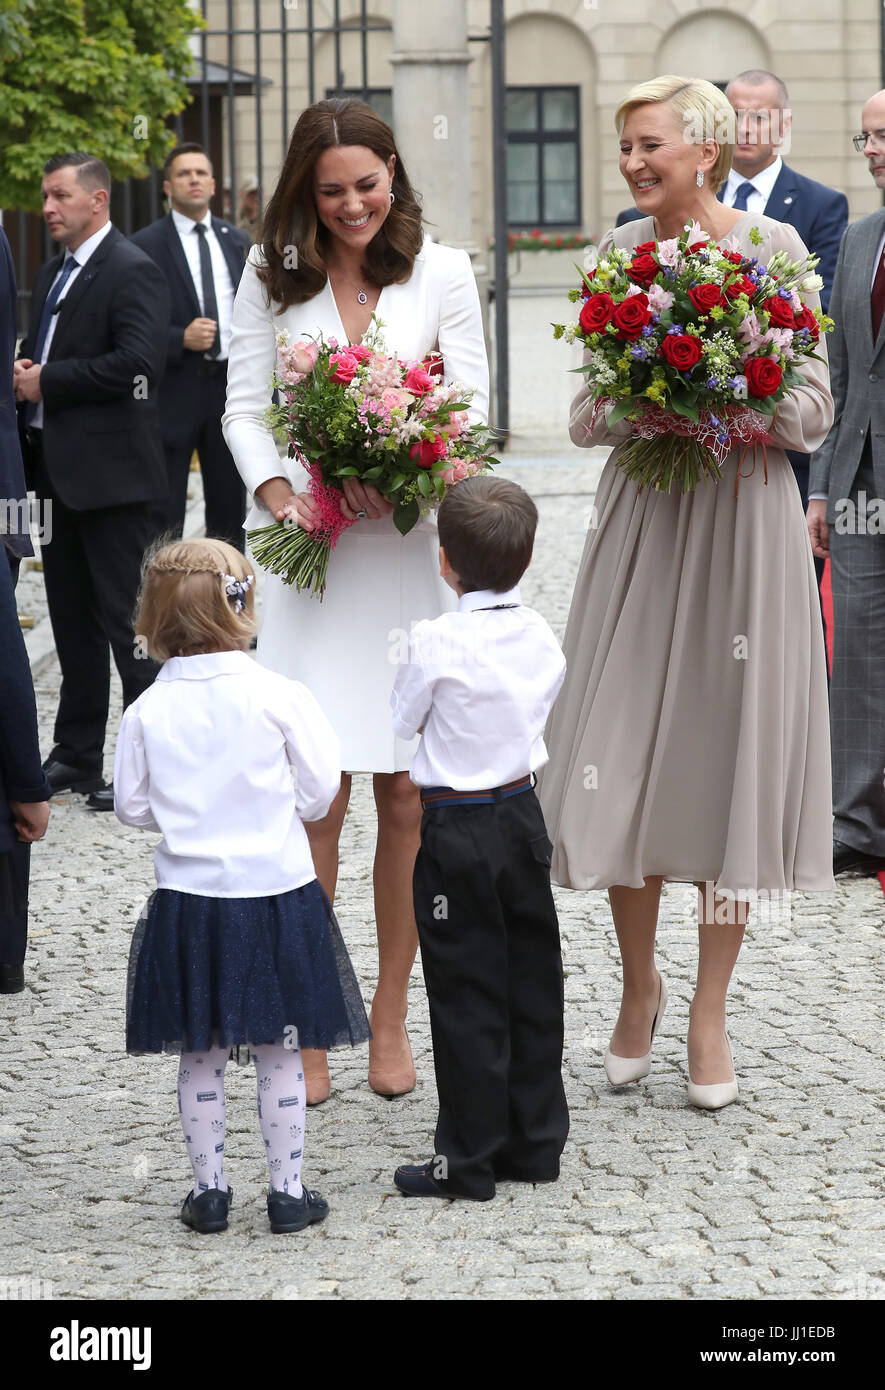 The Duchess of Cambridge meets young wellwishers with Poland's First Lady Agata Duda at the Presidential Palace in Warsaw, Poland, on the first day of her five-day tour of Poland and Germany. Stock Photo